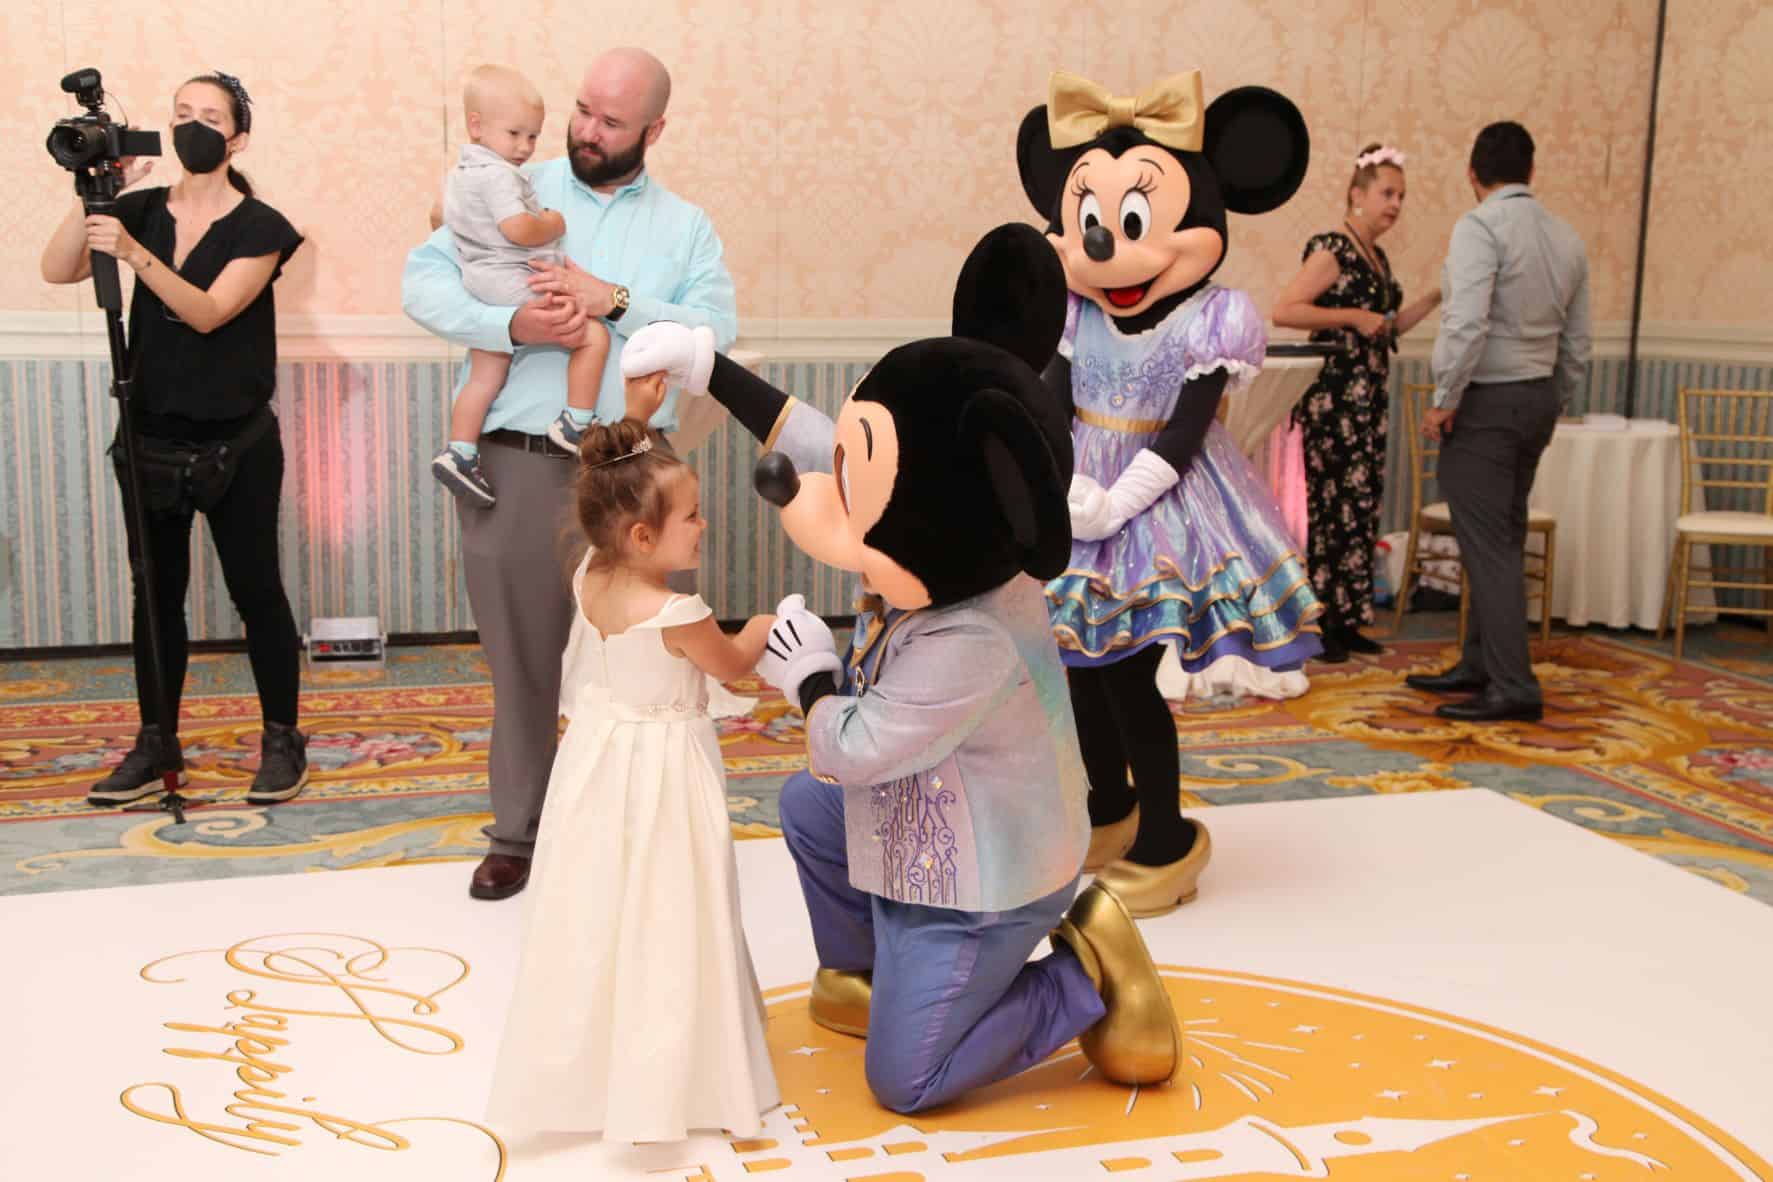 Disney Vow Renewal - Just Marry Weddings - Caldwell Photography - Reception Entertainment